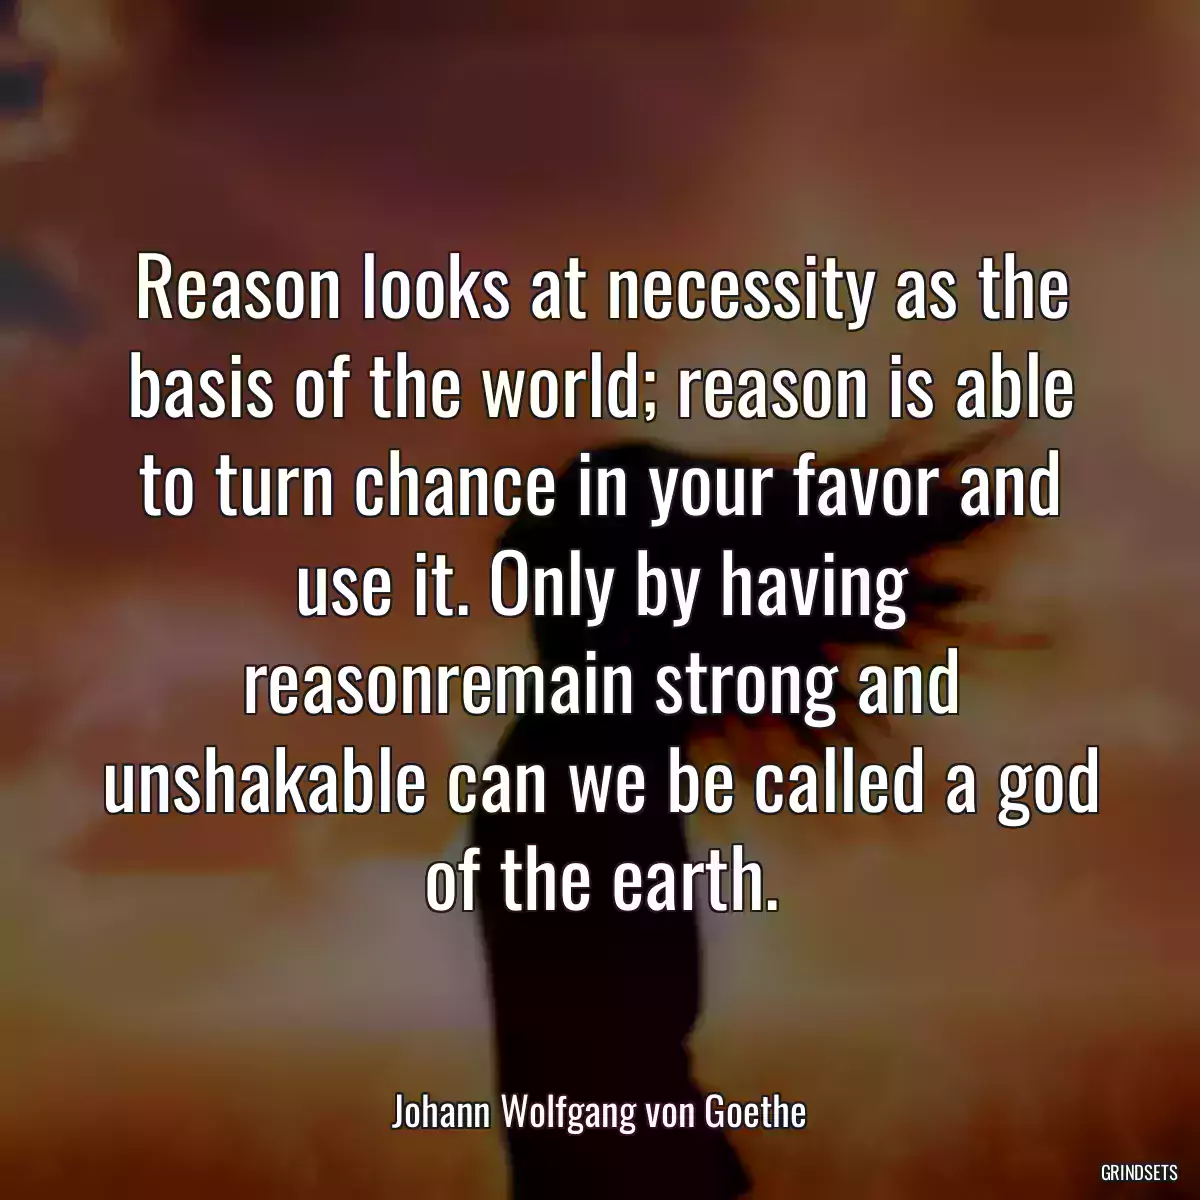 Reason looks at necessity as the basis of the world; reason is able to turn chance in your favor and use it. Only by having reasonremain strong and unshakable can we be called a god of the earth.